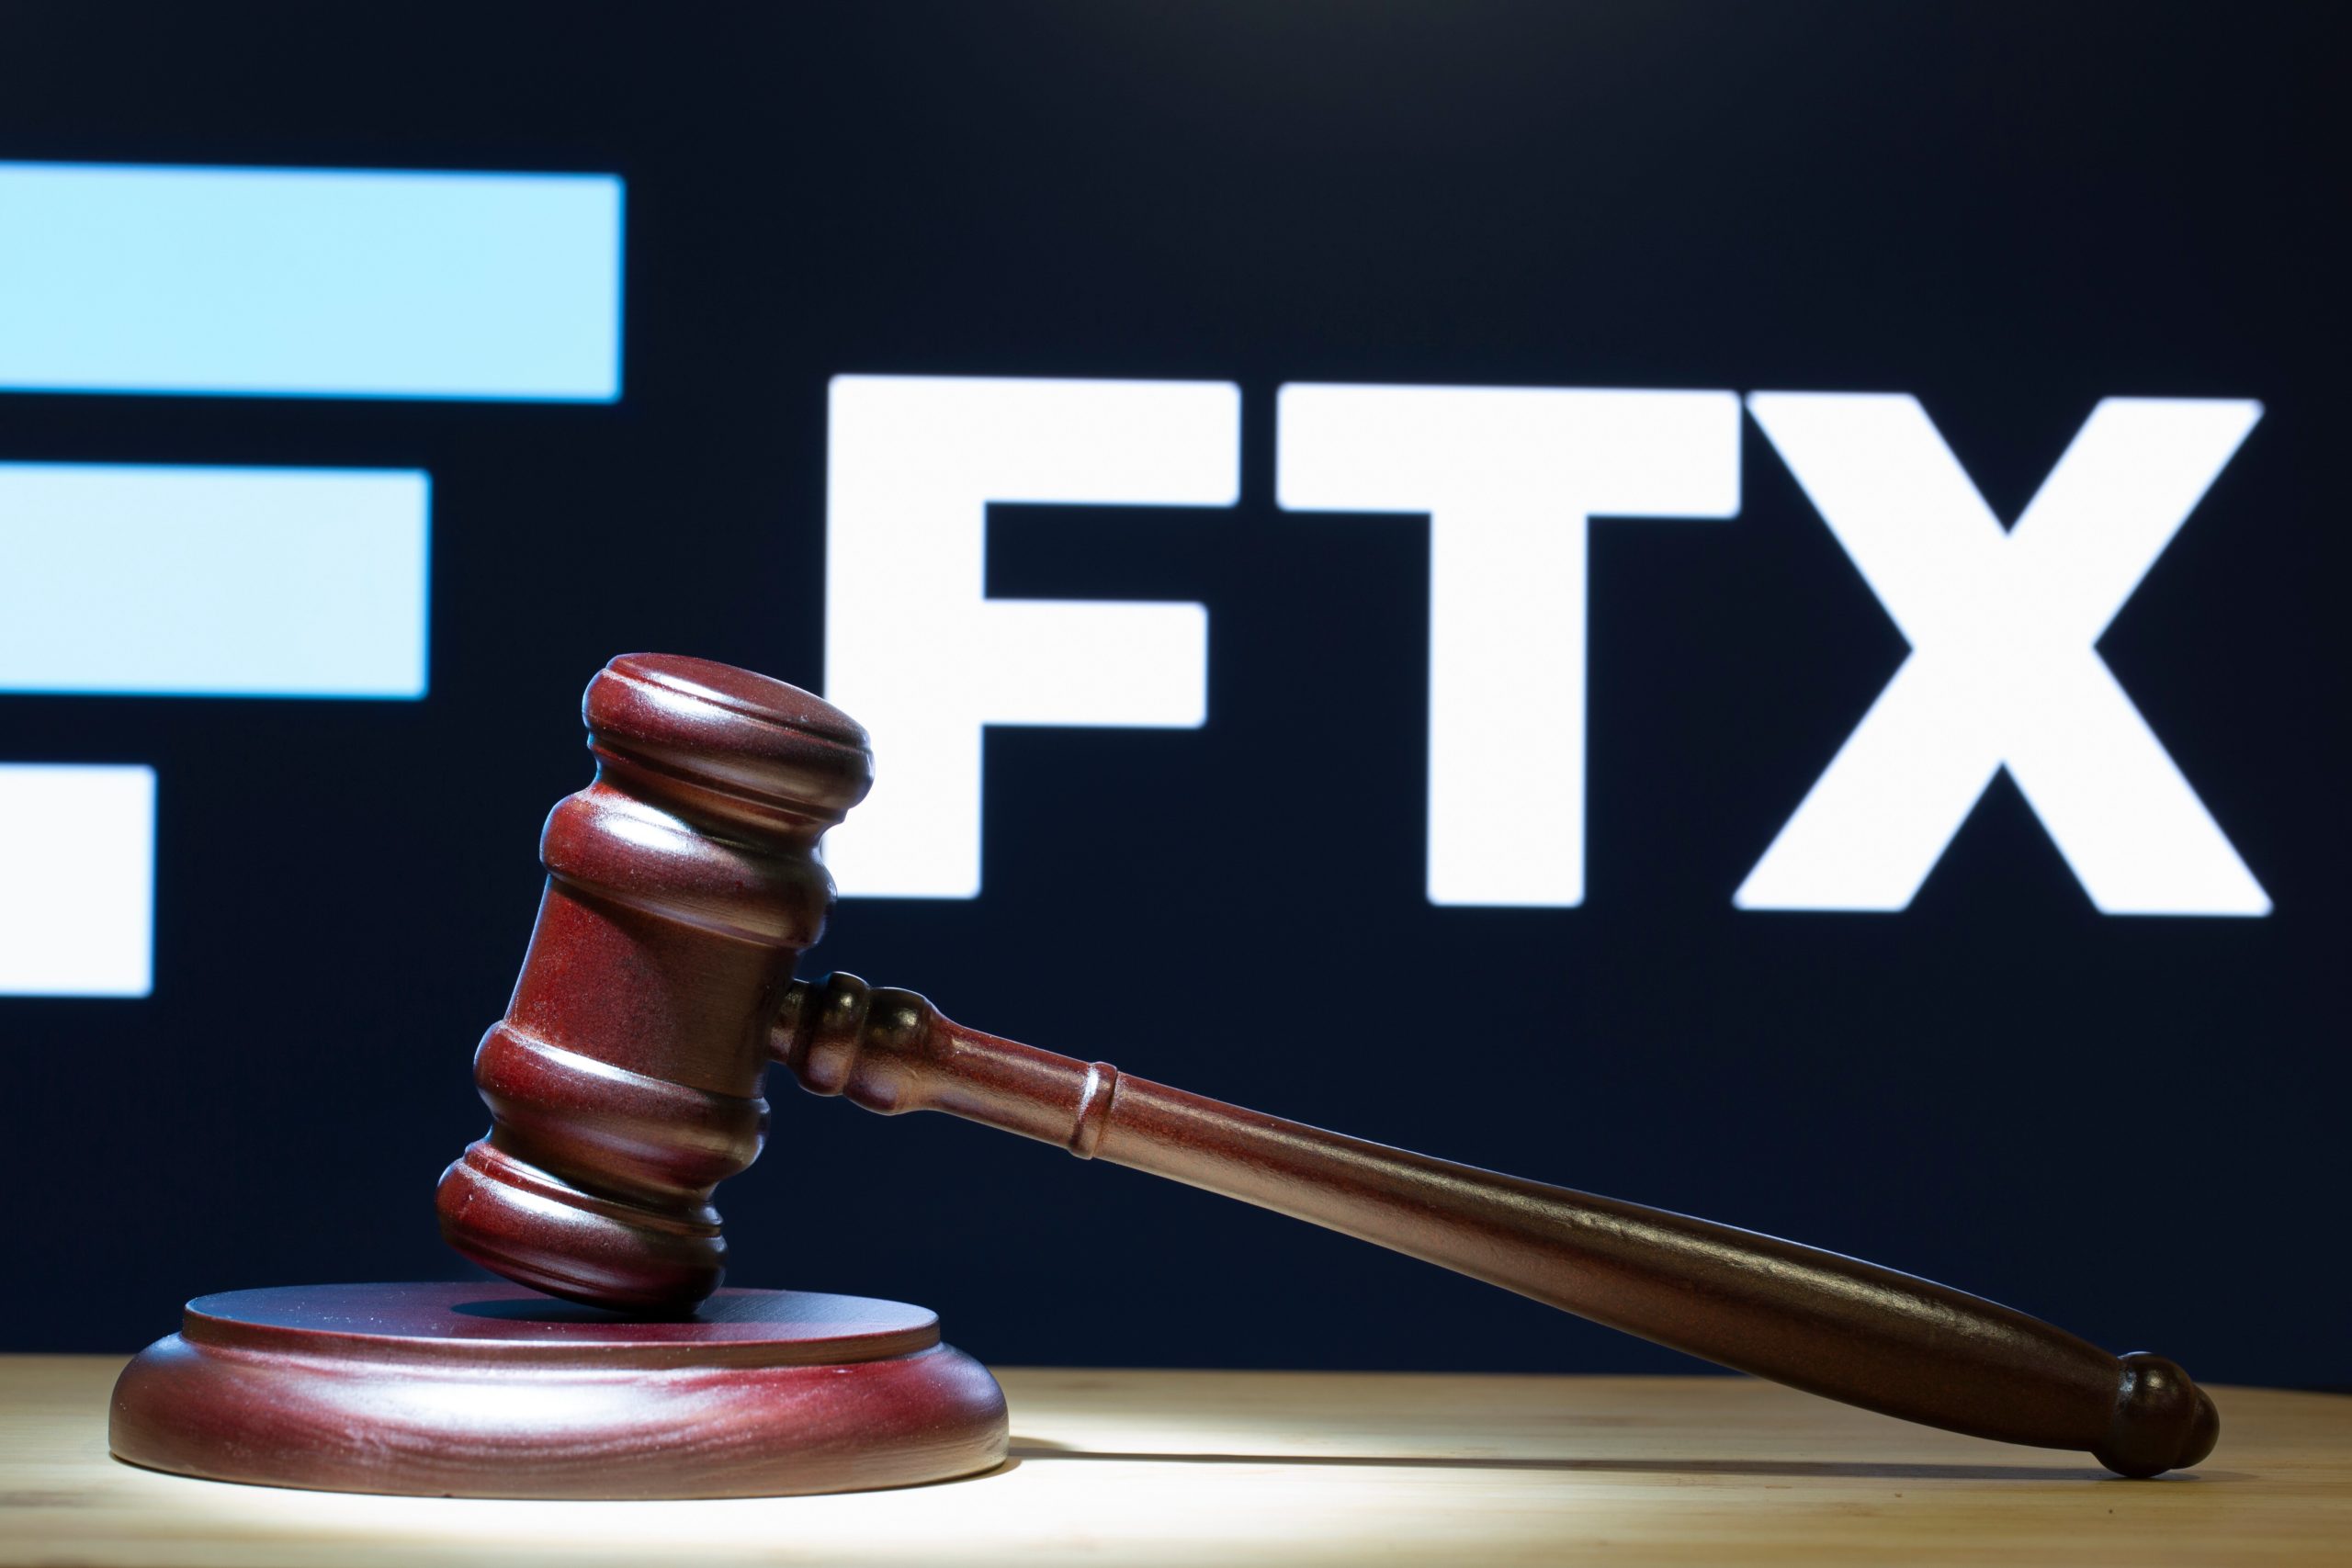 FTX Founder Sam Bankman-Fried Faces More Criminal Charges – The Latest Twist in a High-Profile Case